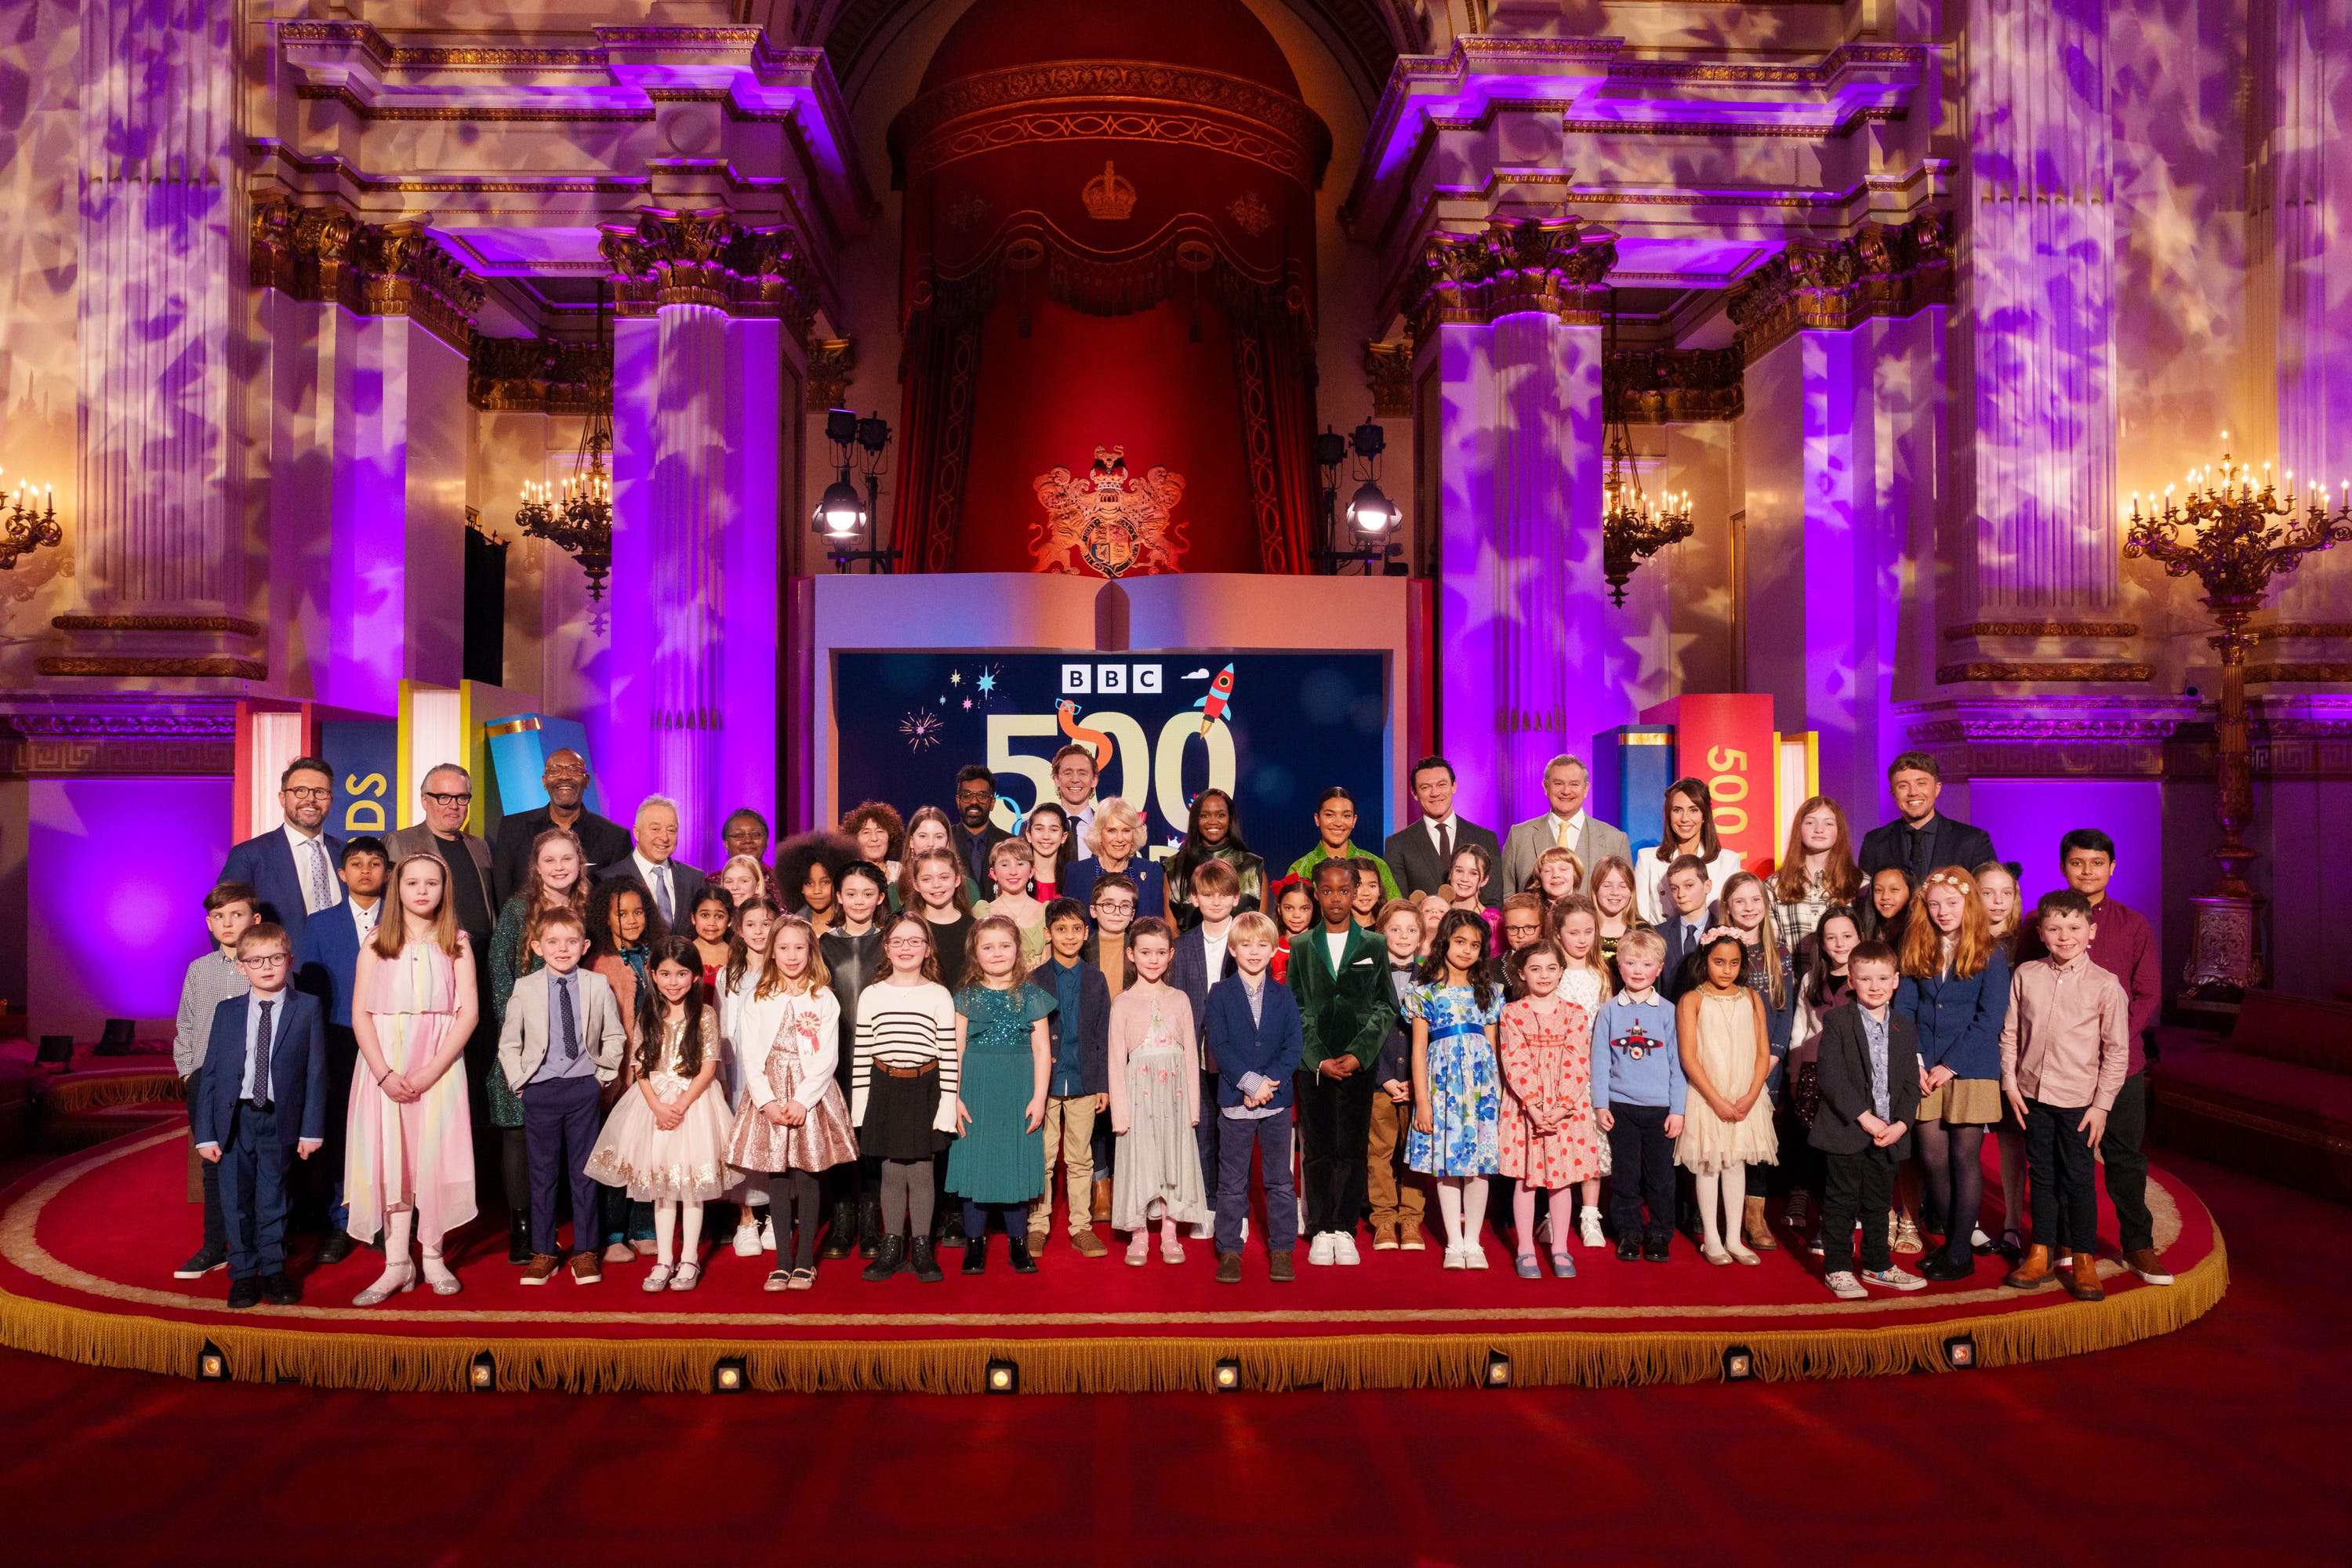 The Queen, the BBC 500 Words winners and celebrity readers (Pete Dadds/BBC/PA) 